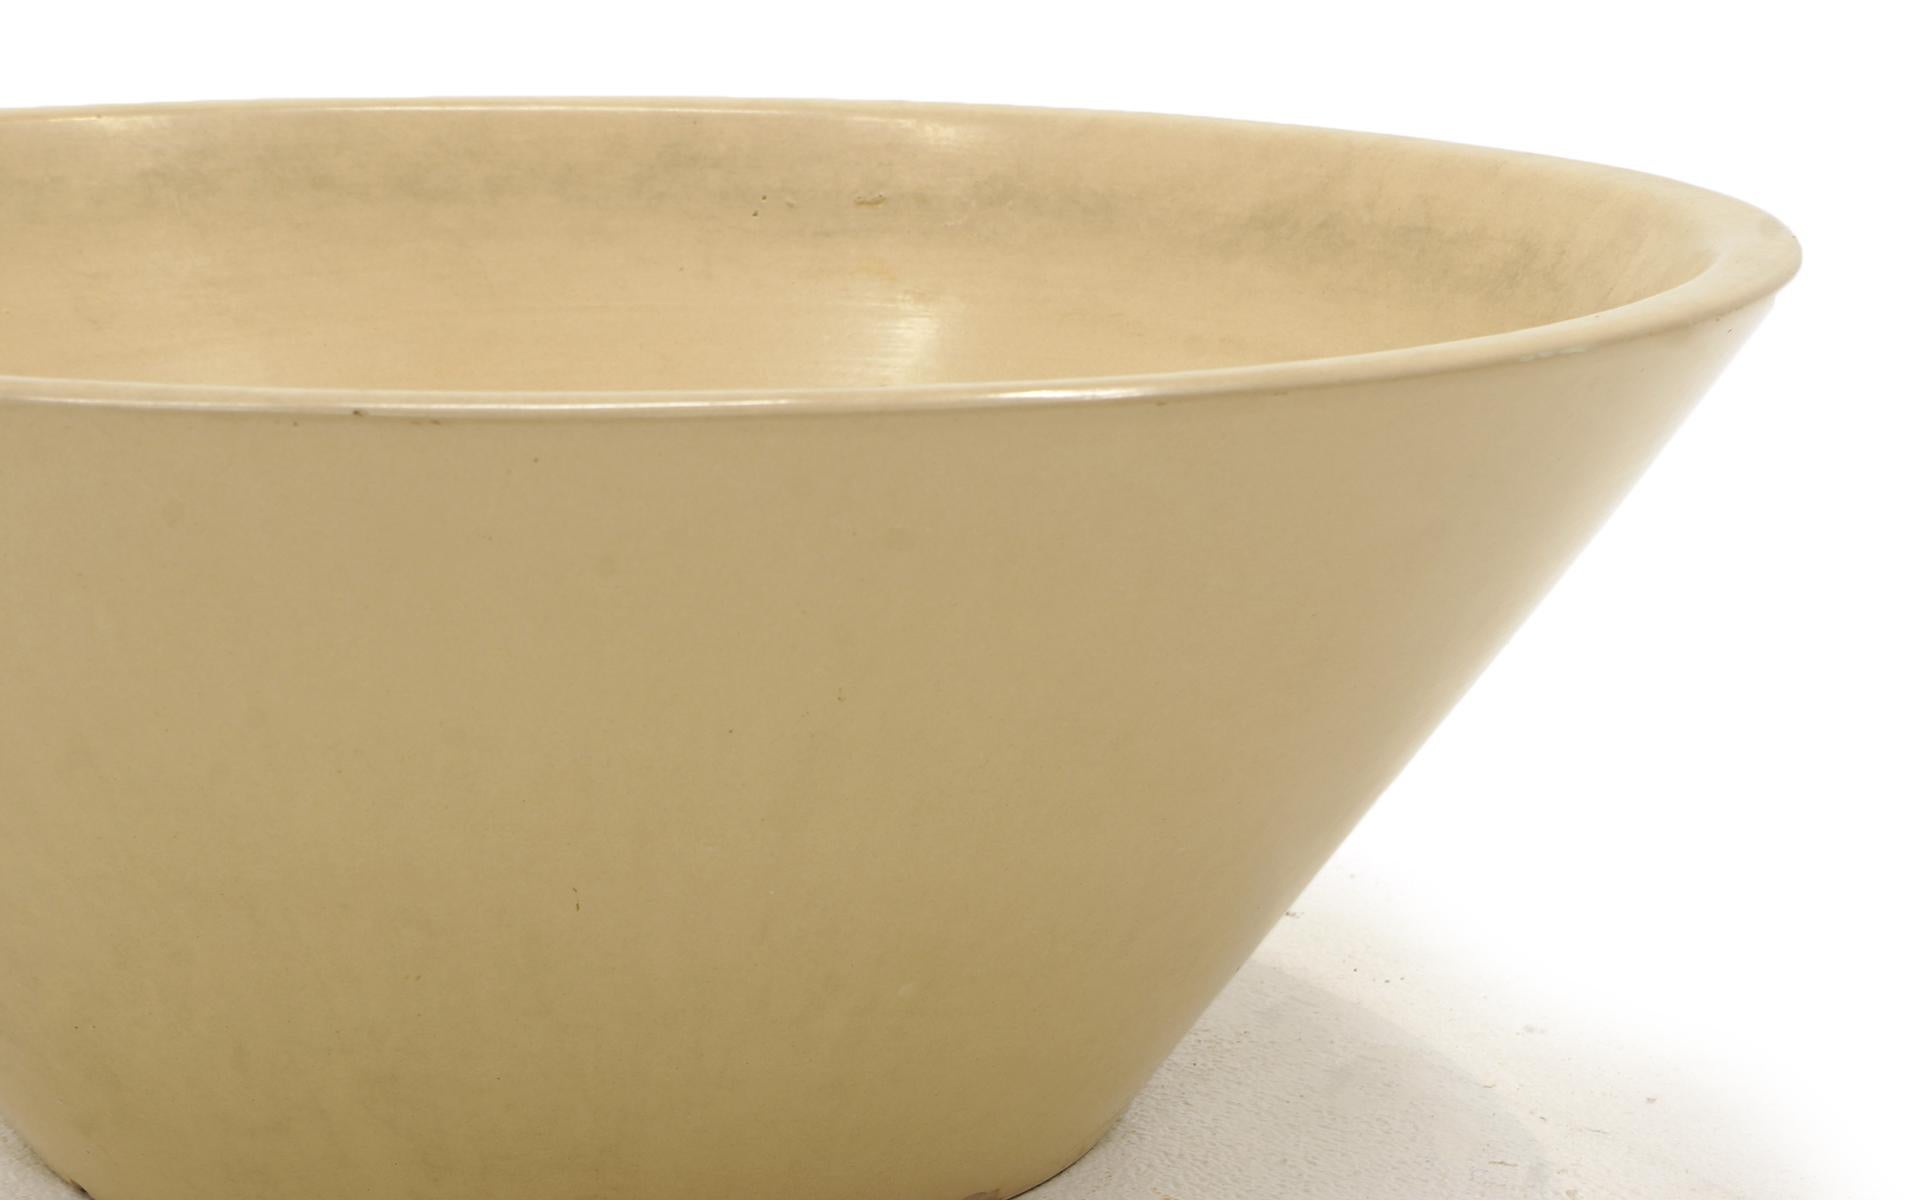 American Wok Planter by Legardo Tackett for Architectural Pottery, Ready to Use